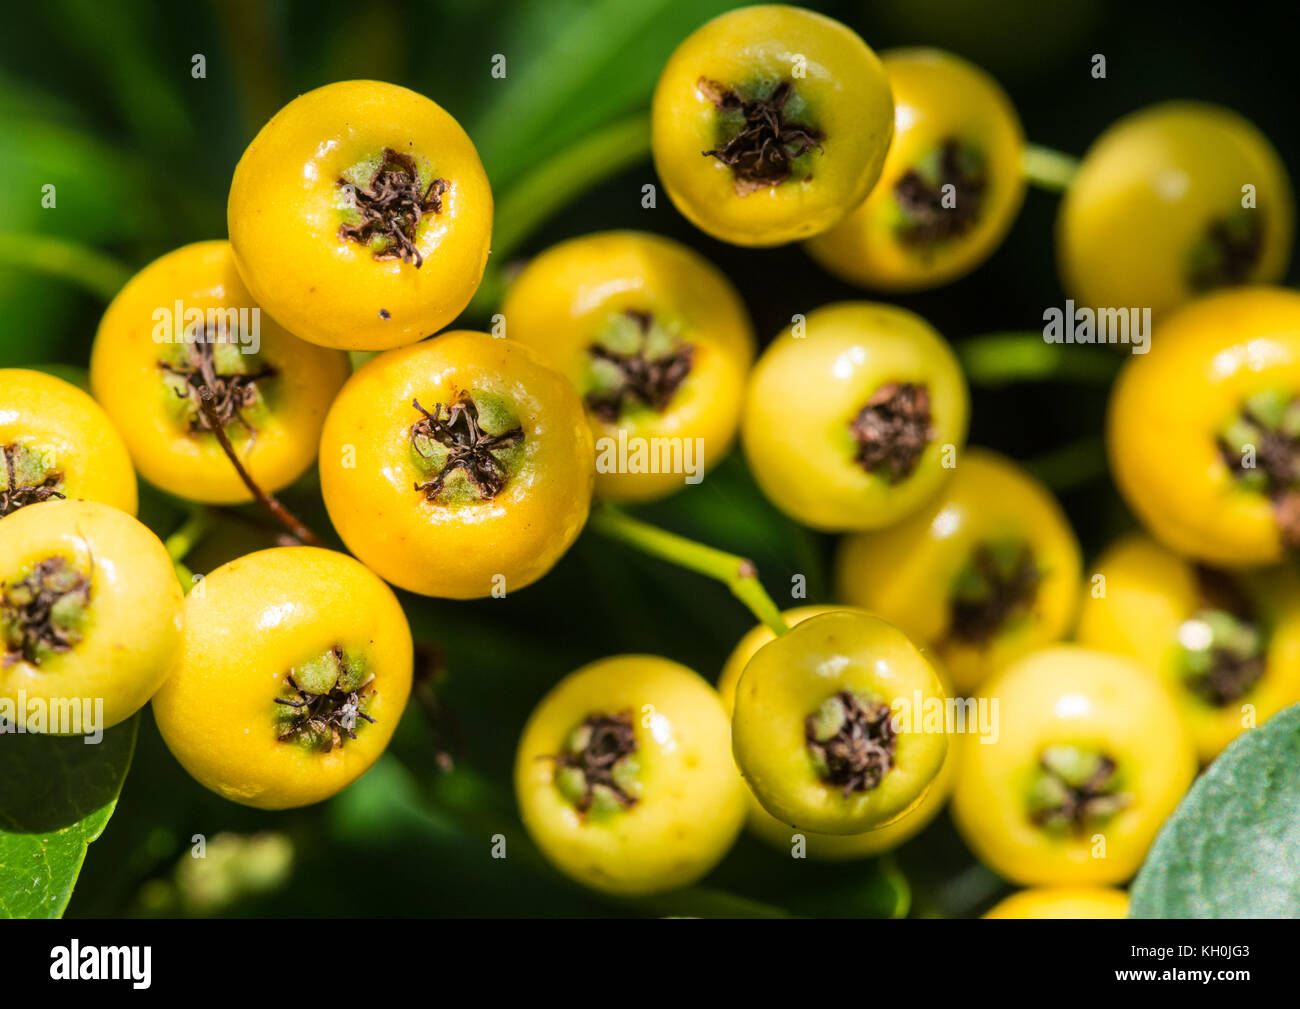 A macro shot of some yellow pyracantha berries. Stock Photo